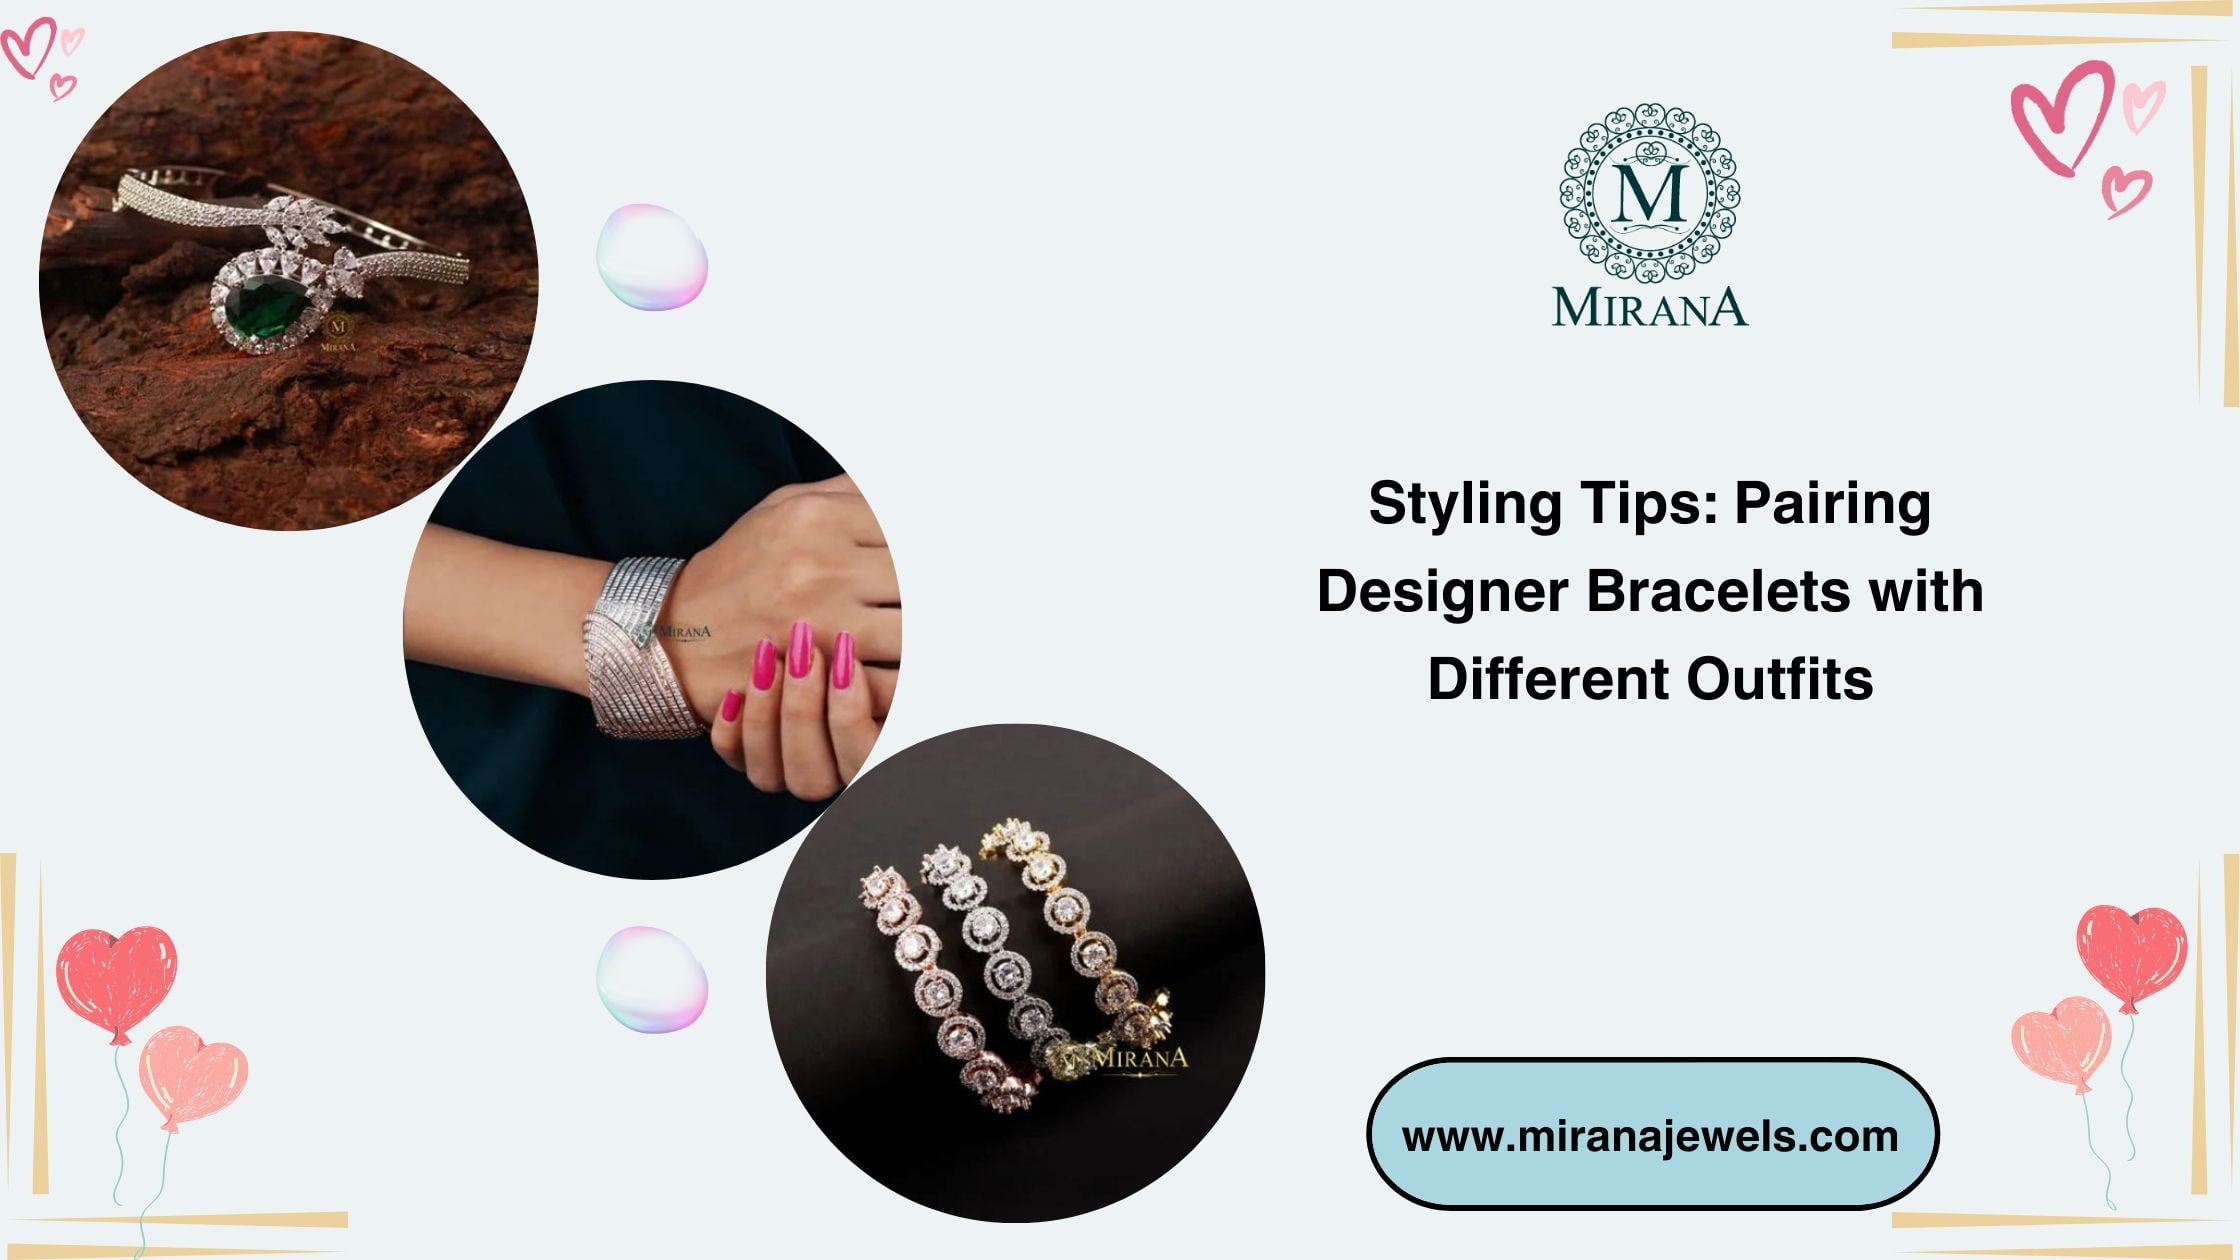 Styling Tips: Pairing Designer Bracelets with Different Outfits